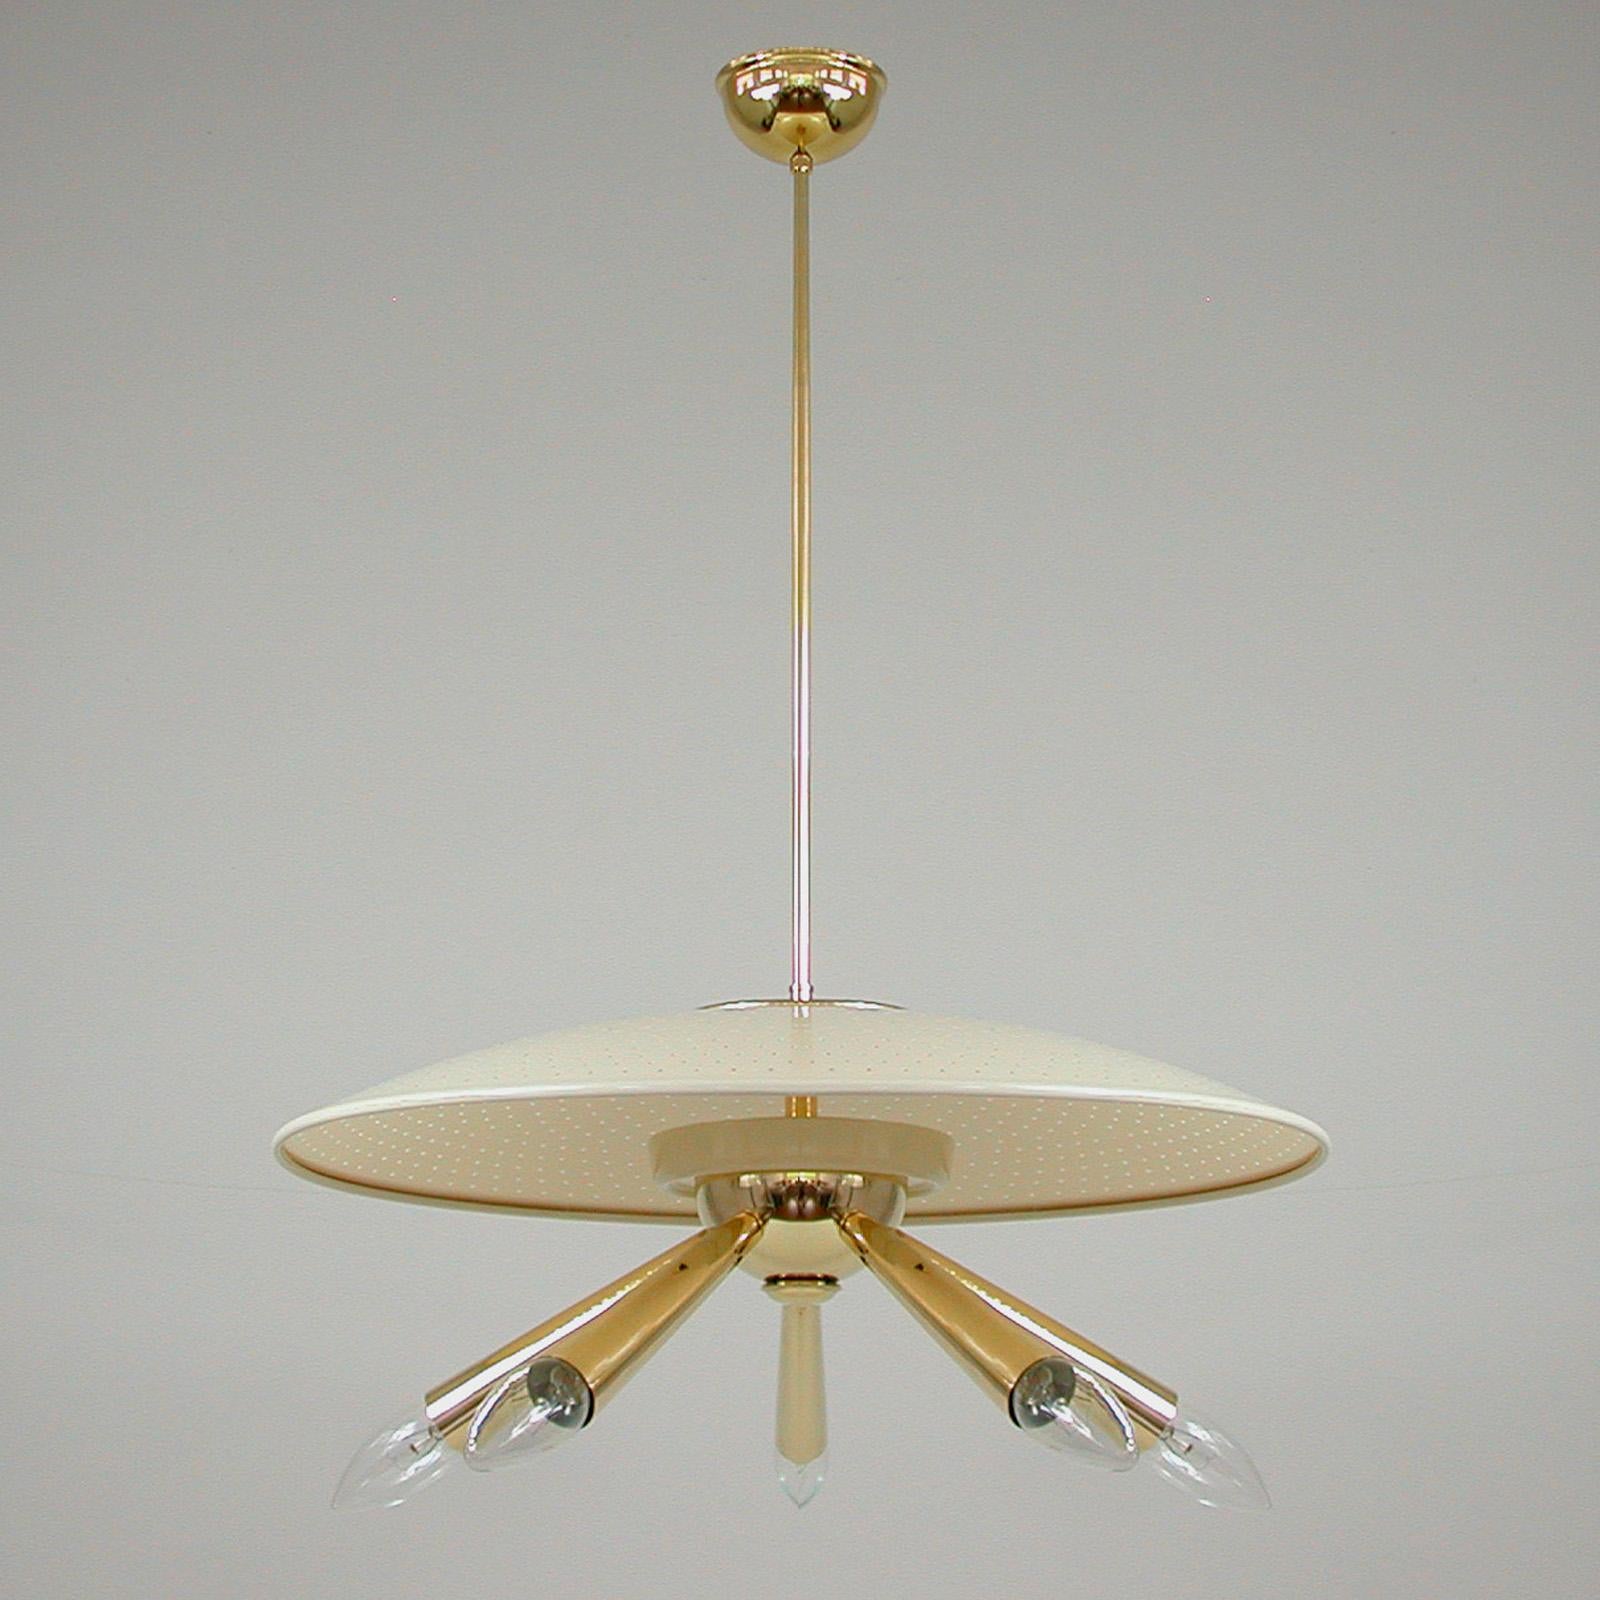 This unusual chandelier was designed and manufactured in Italy in the 1950s. It features a brass body with 5 brass lamp arms and cream colored perforated plastic dome lamp shade. Wired for use in US and any other country of the world. 

The light